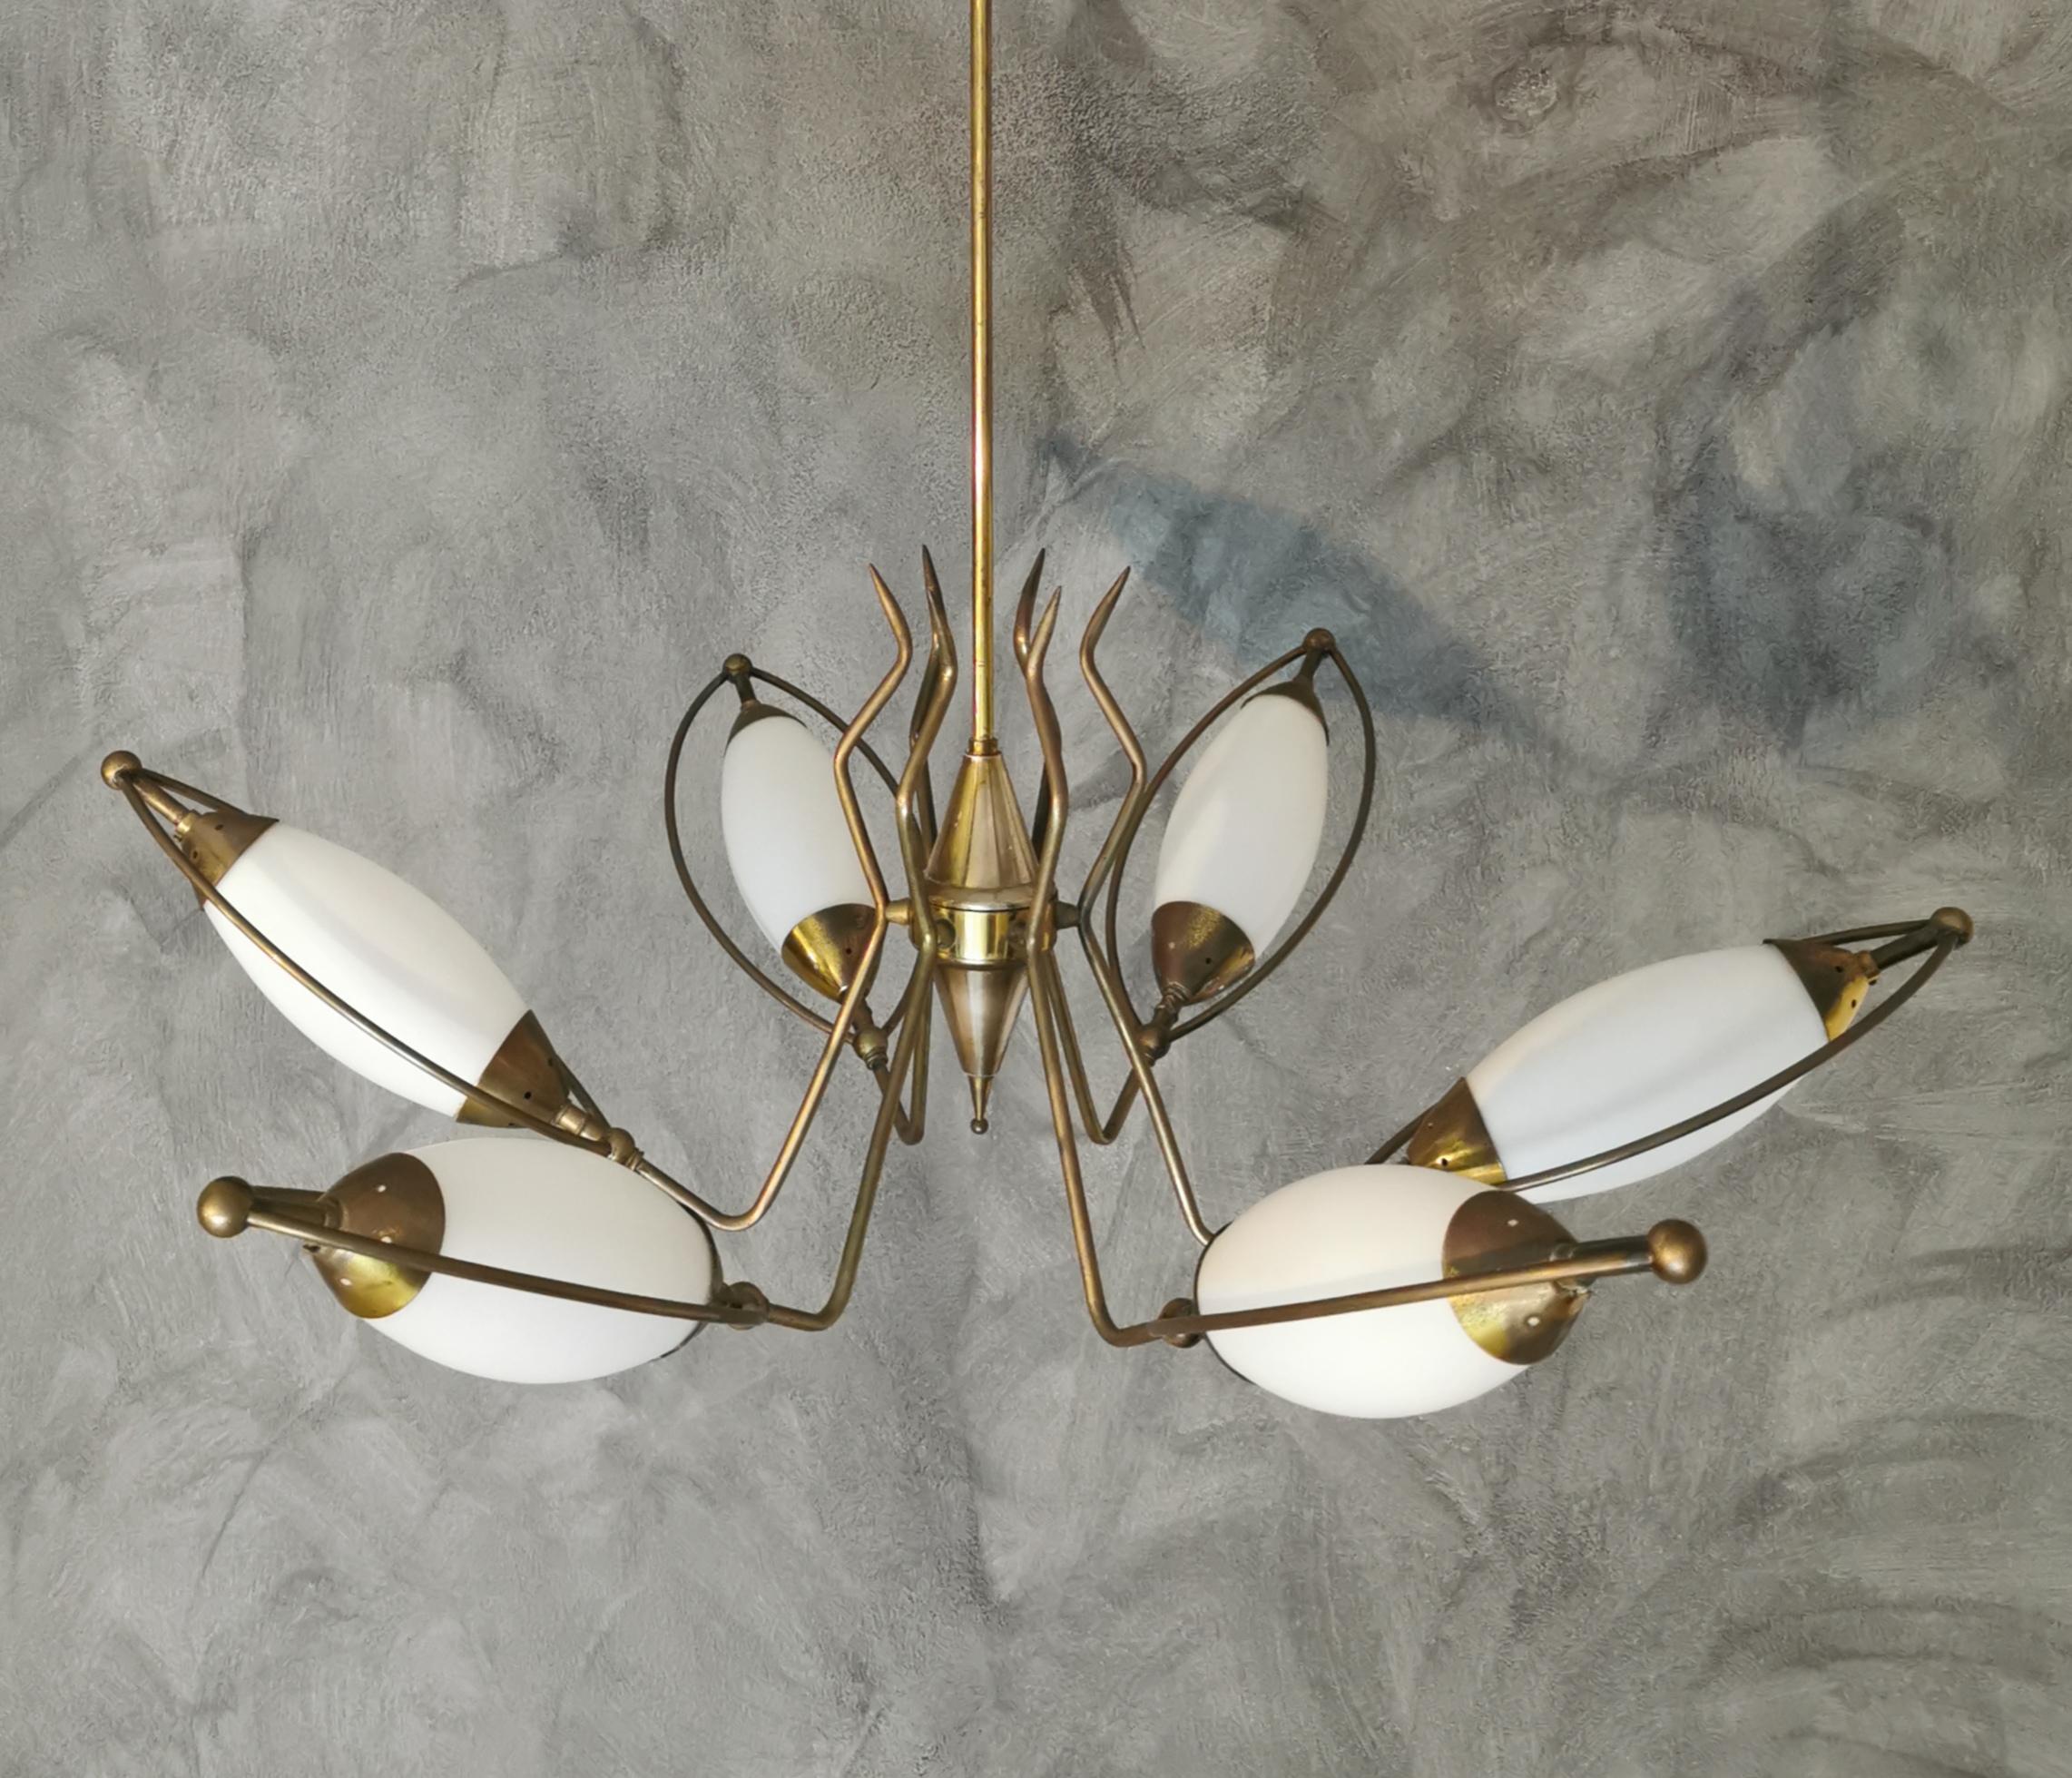 Chandelier in the style of Stilnovo at 6-light in brass in the shape of a spider, with opal glass. From the 1960s. Italian design.